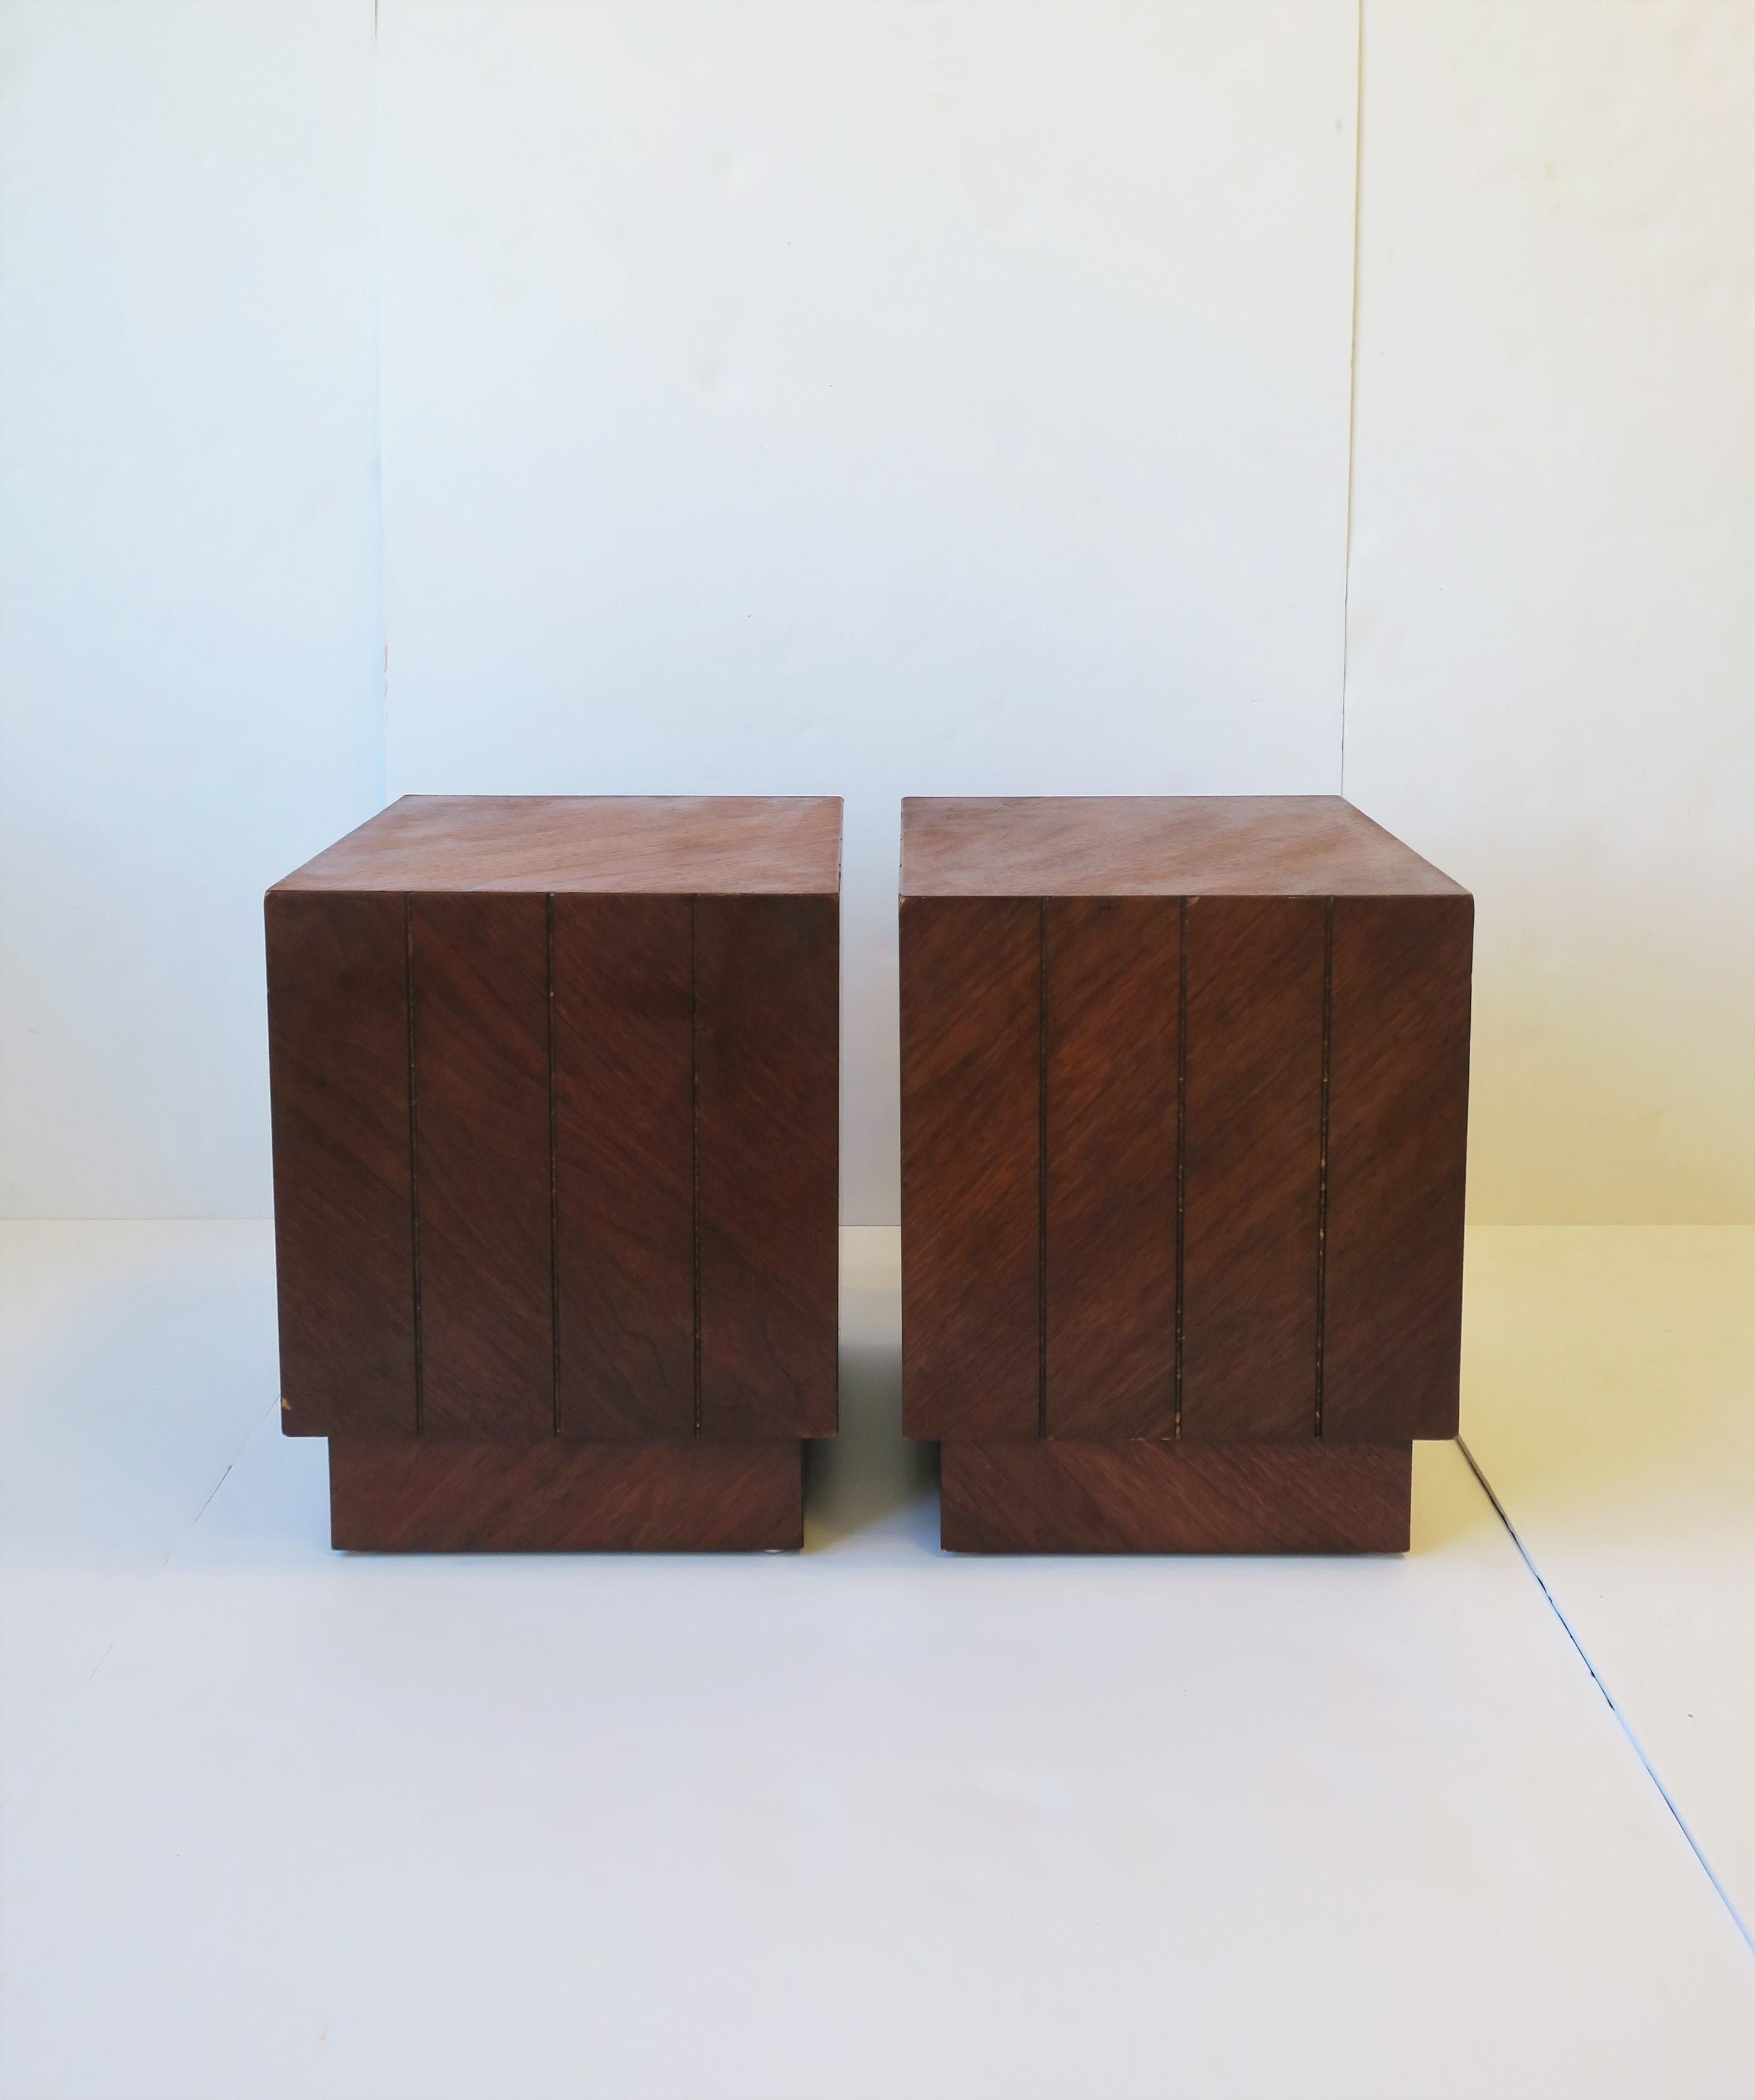 A small pair/set of Midcentury Modern rectangular wood veneered side, end, drinks or cocktails tables, circa mid-20th century. This pair/set is versatile as side tables, drinks tables, cocktail tables, or end tables, as shown in images. Tables have